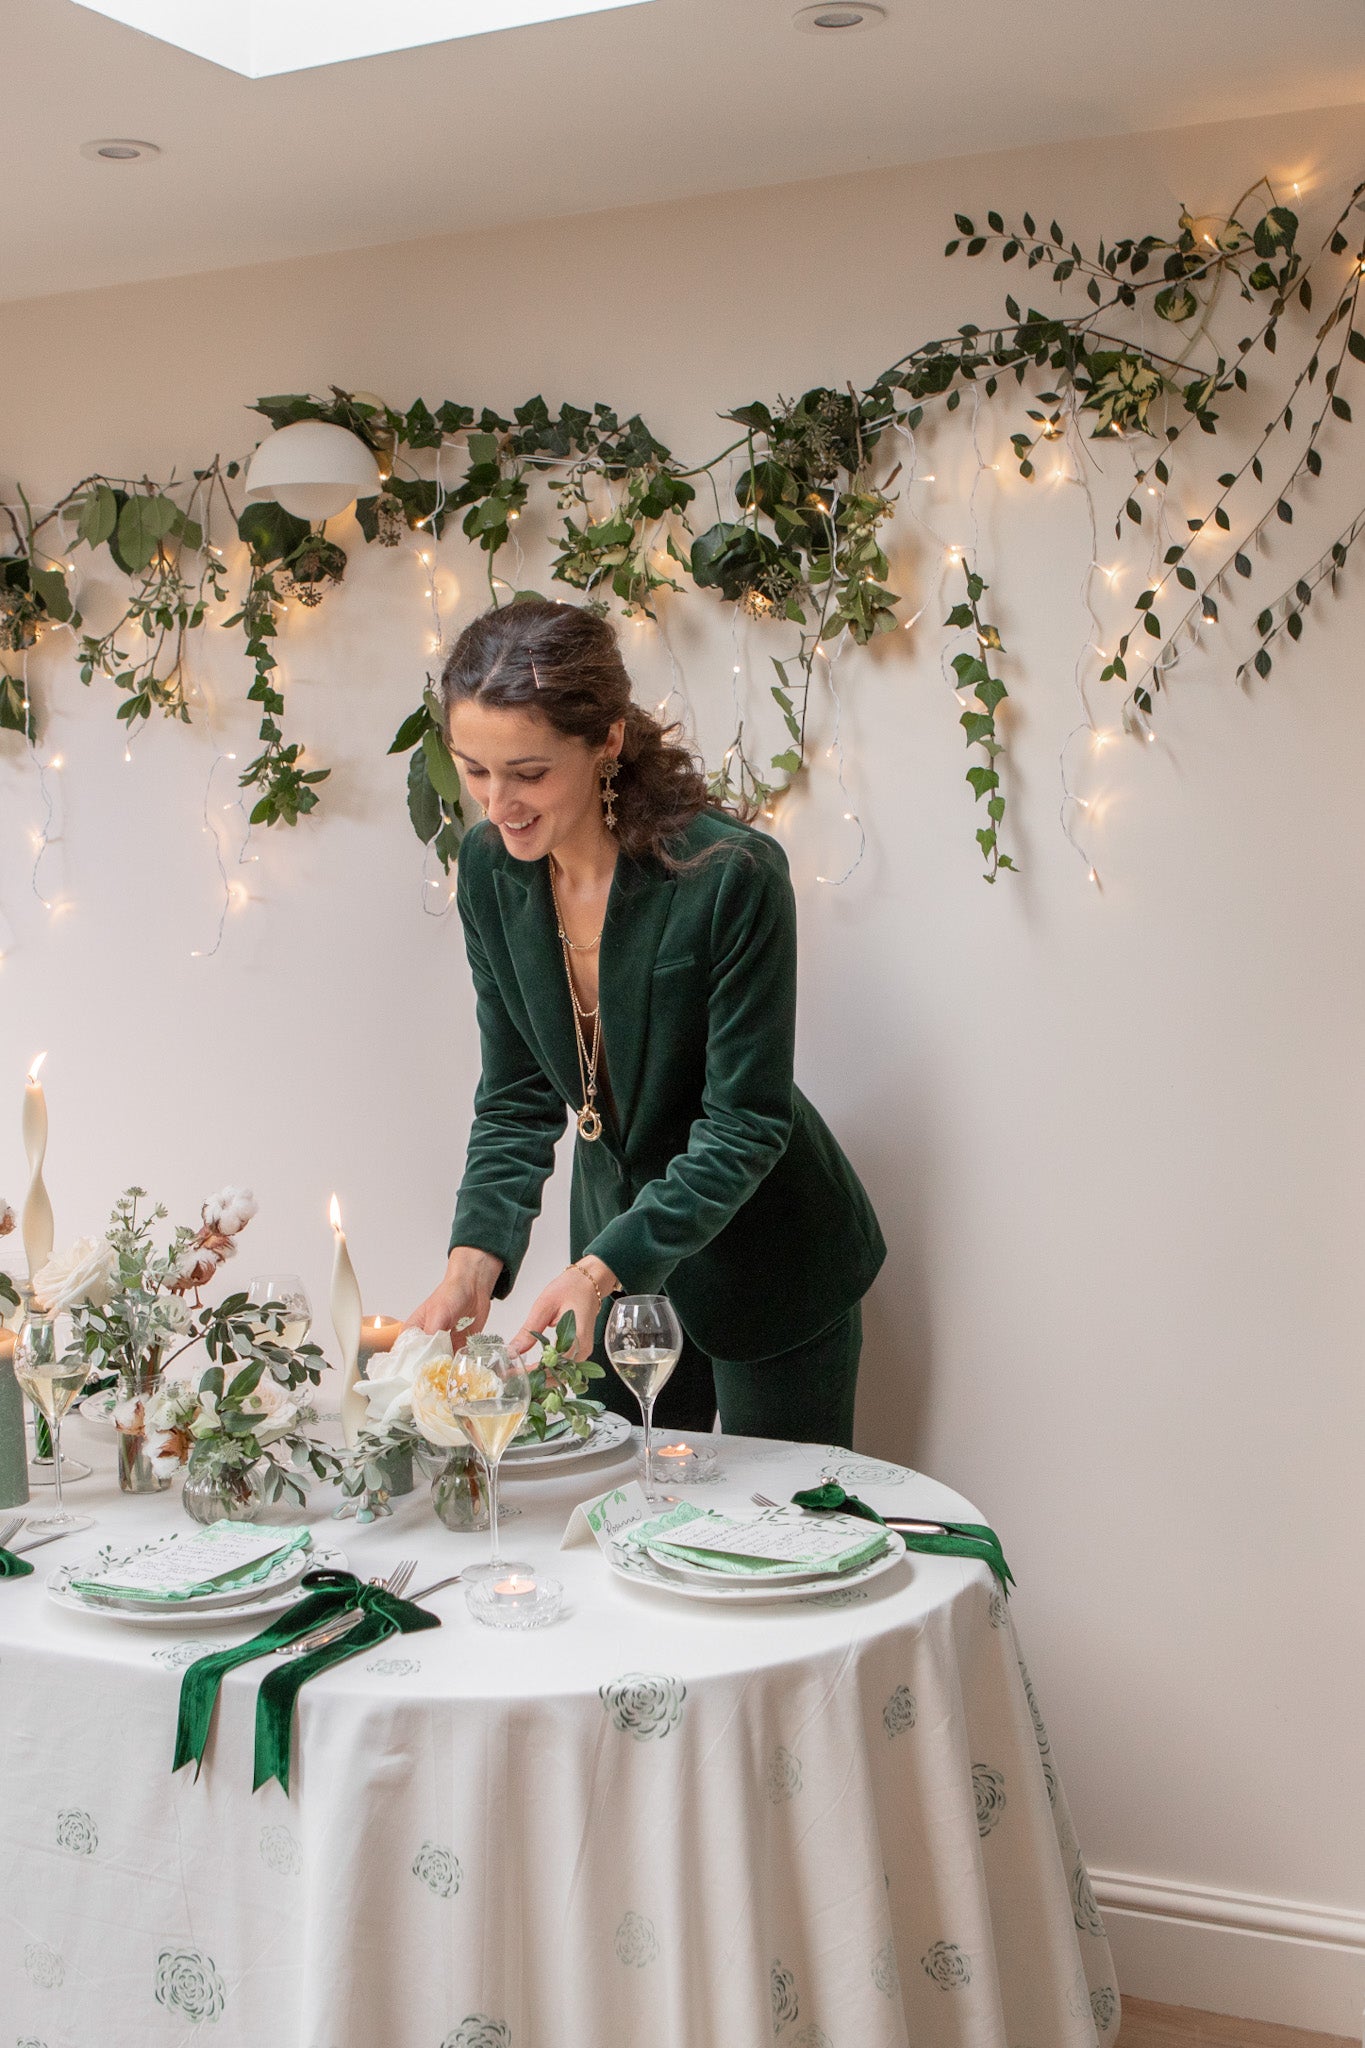 Green and white festive tablescape with foliage backdrop